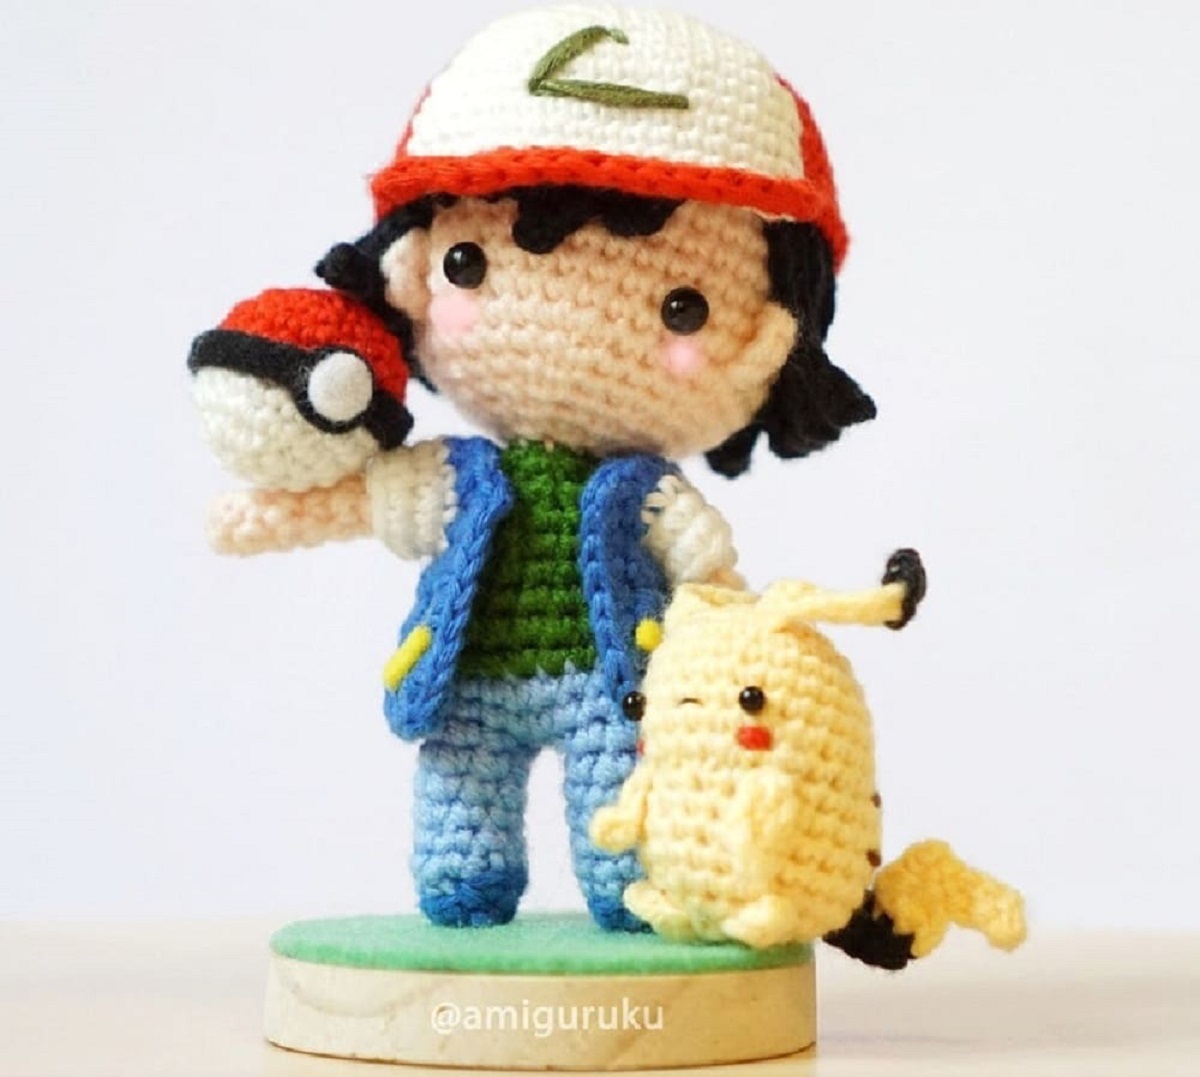 Stuffed crochet Pickachu standing next to a crochet Ash holding a large Pokeball in his hand and standing on a small grassy plaque.